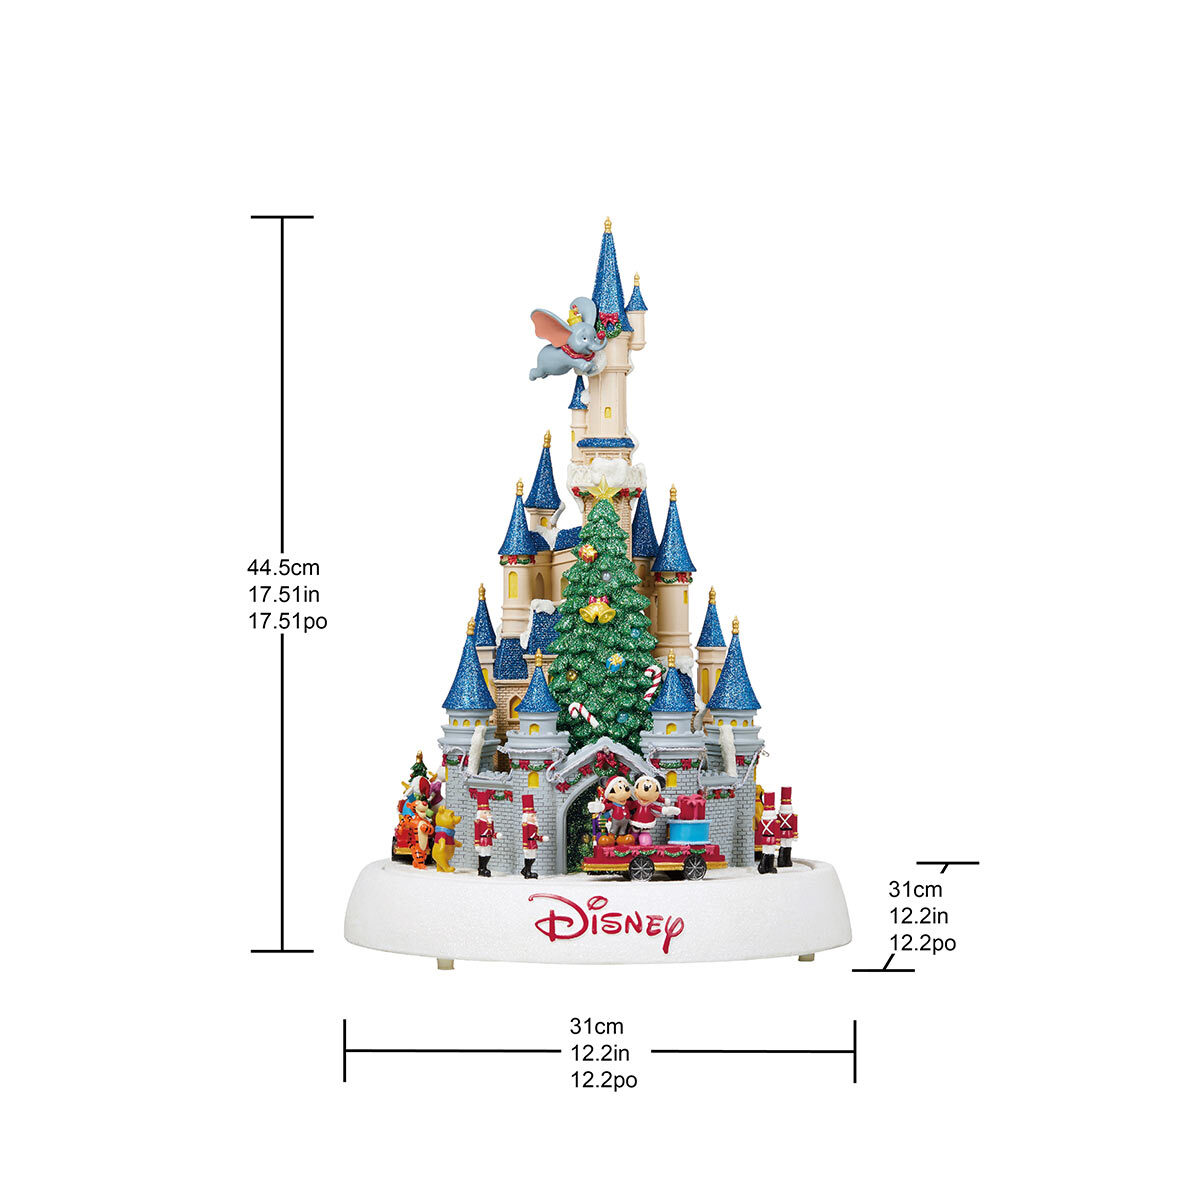 Buy Disney Holiday Parade Centrepiece Dimensions Image at Costco.co.uk